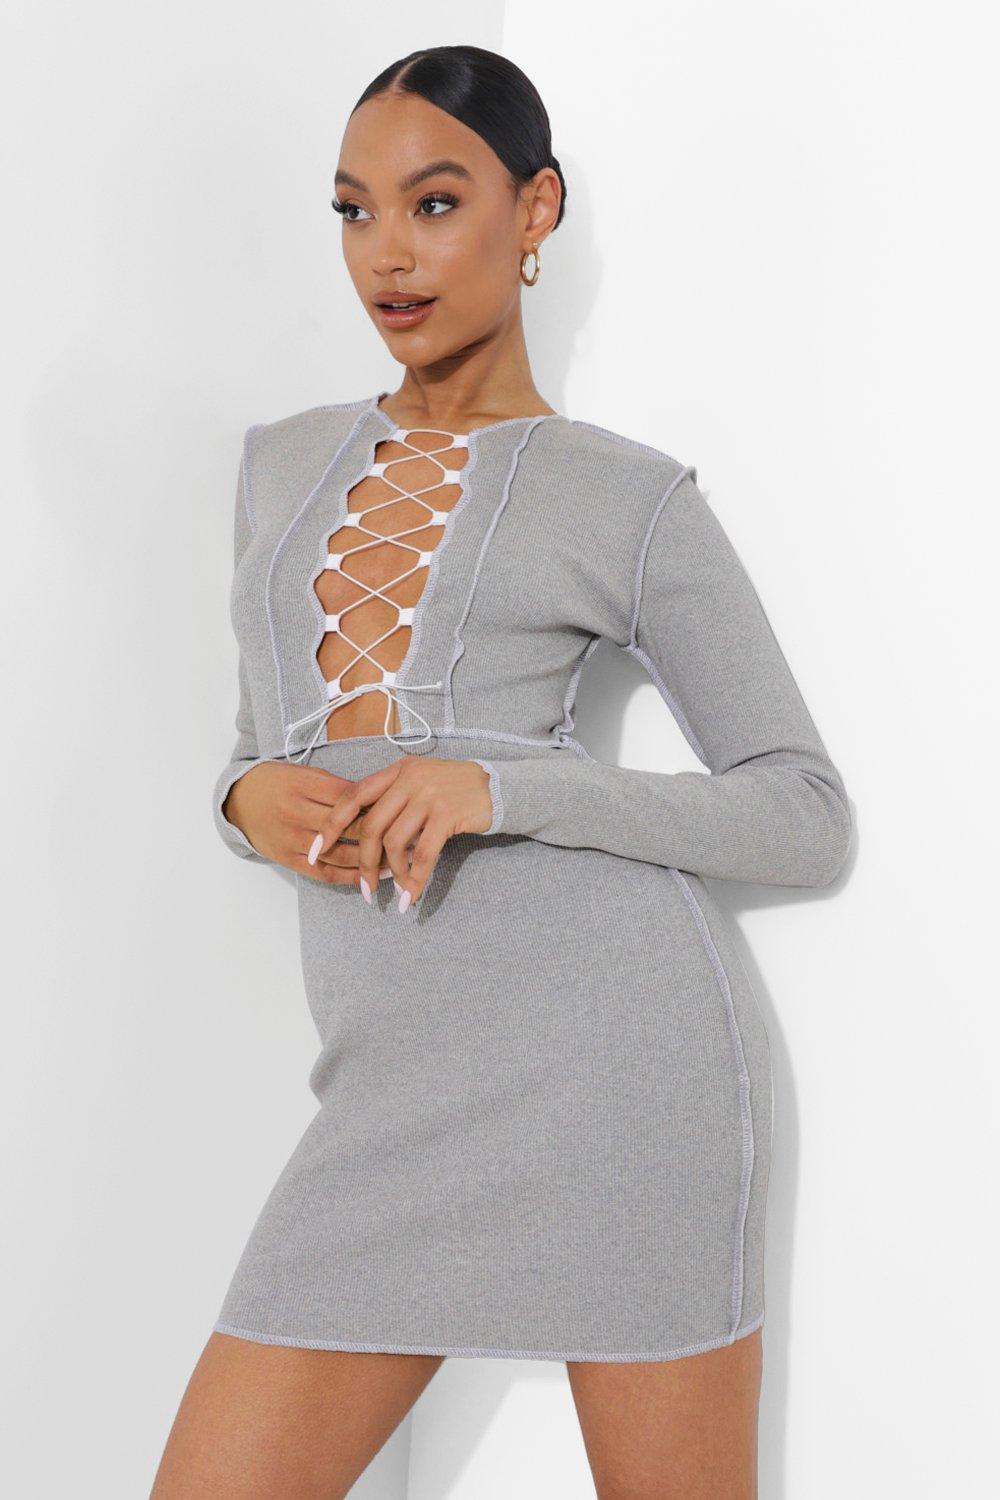 Boohoo Exposed Seam Lace Up Mini Dress in Grey (Gray) - Lyst